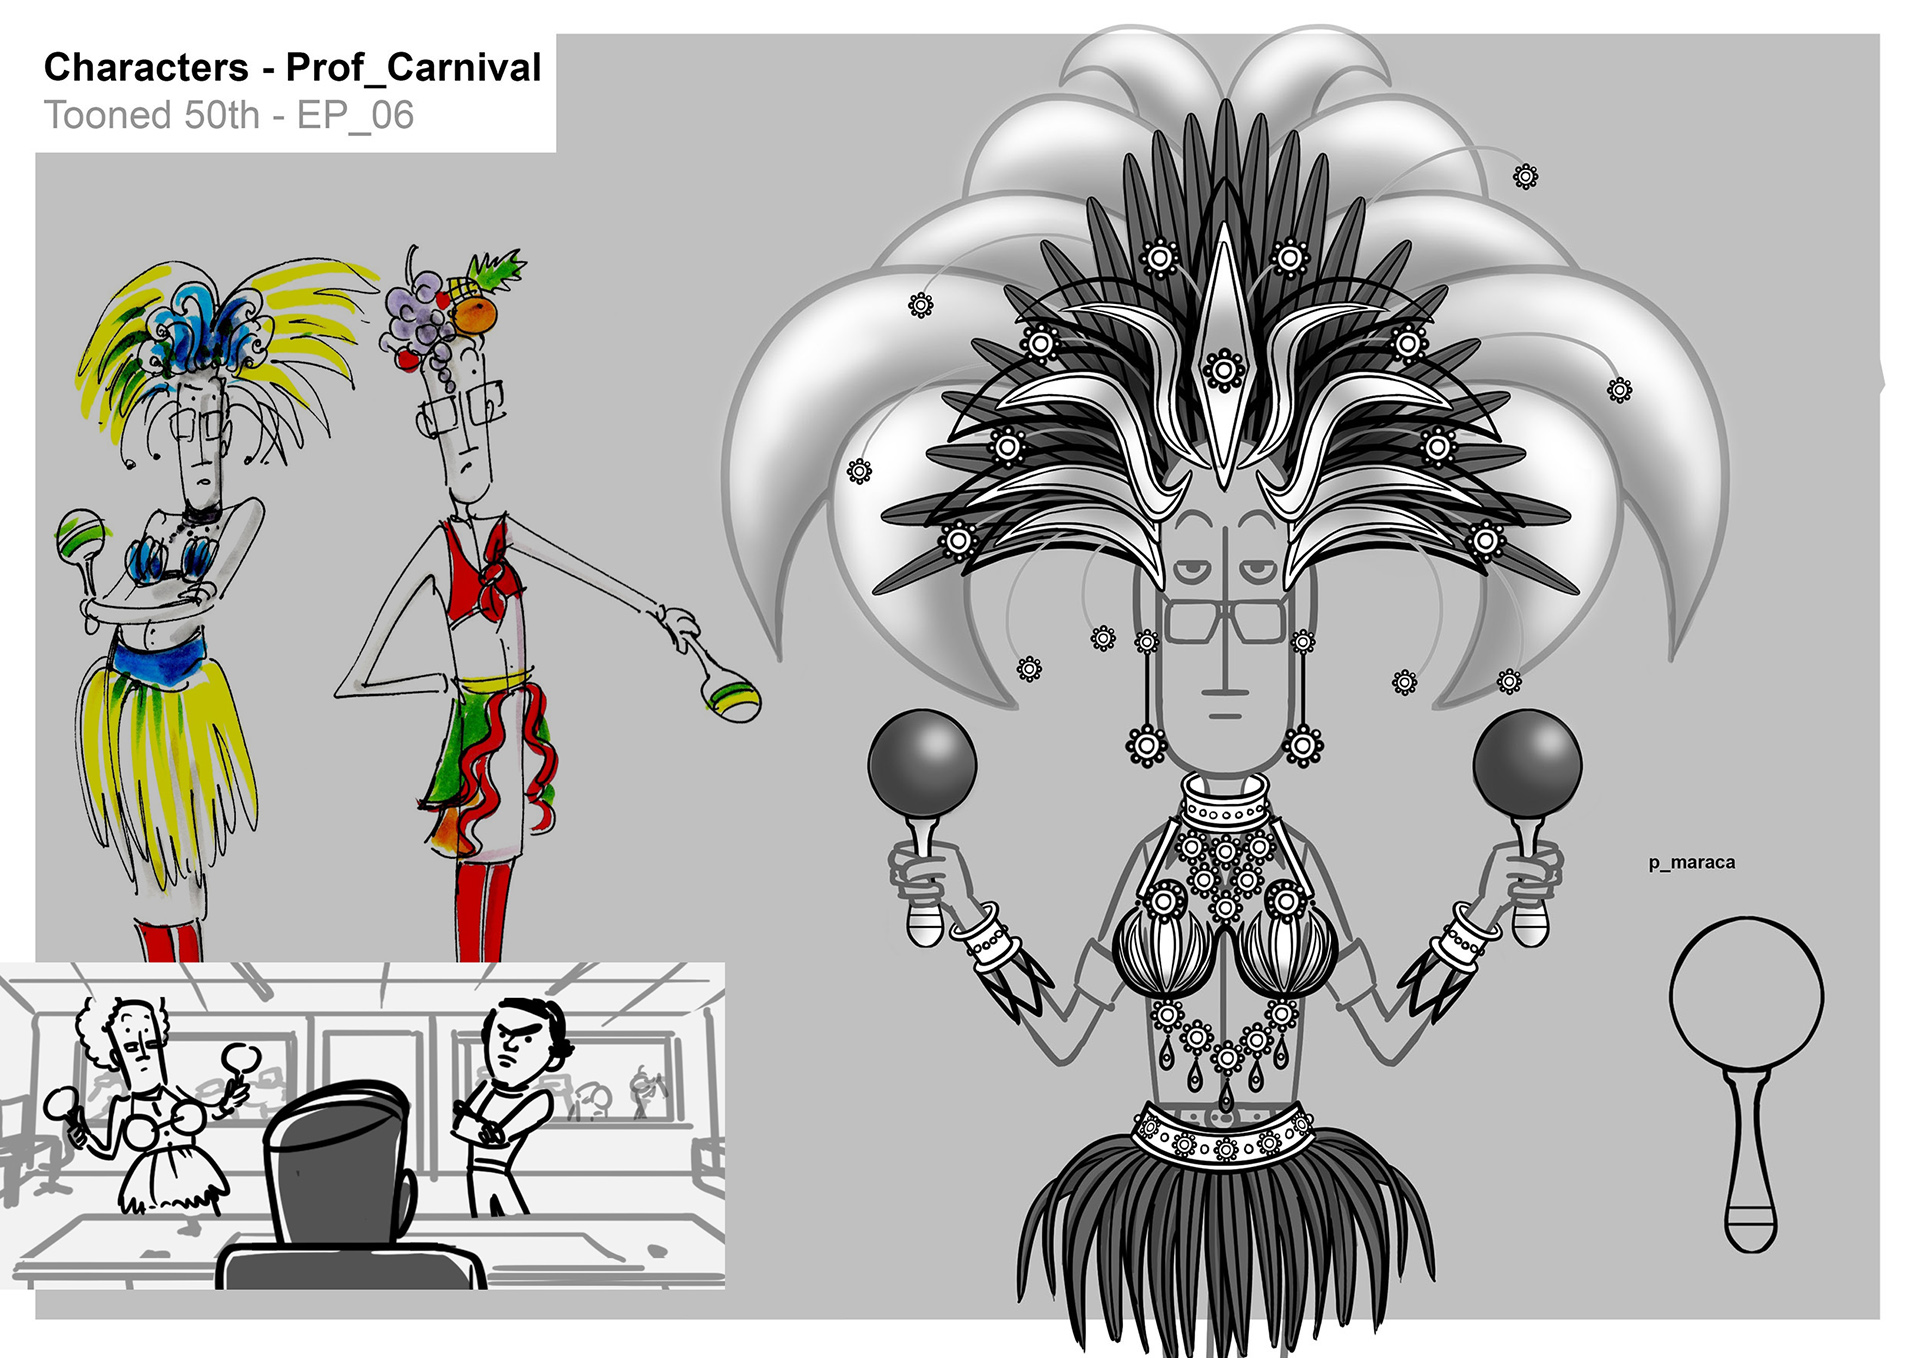 TOON50th-CONCEPT-EP6_Prof_Carnival_b